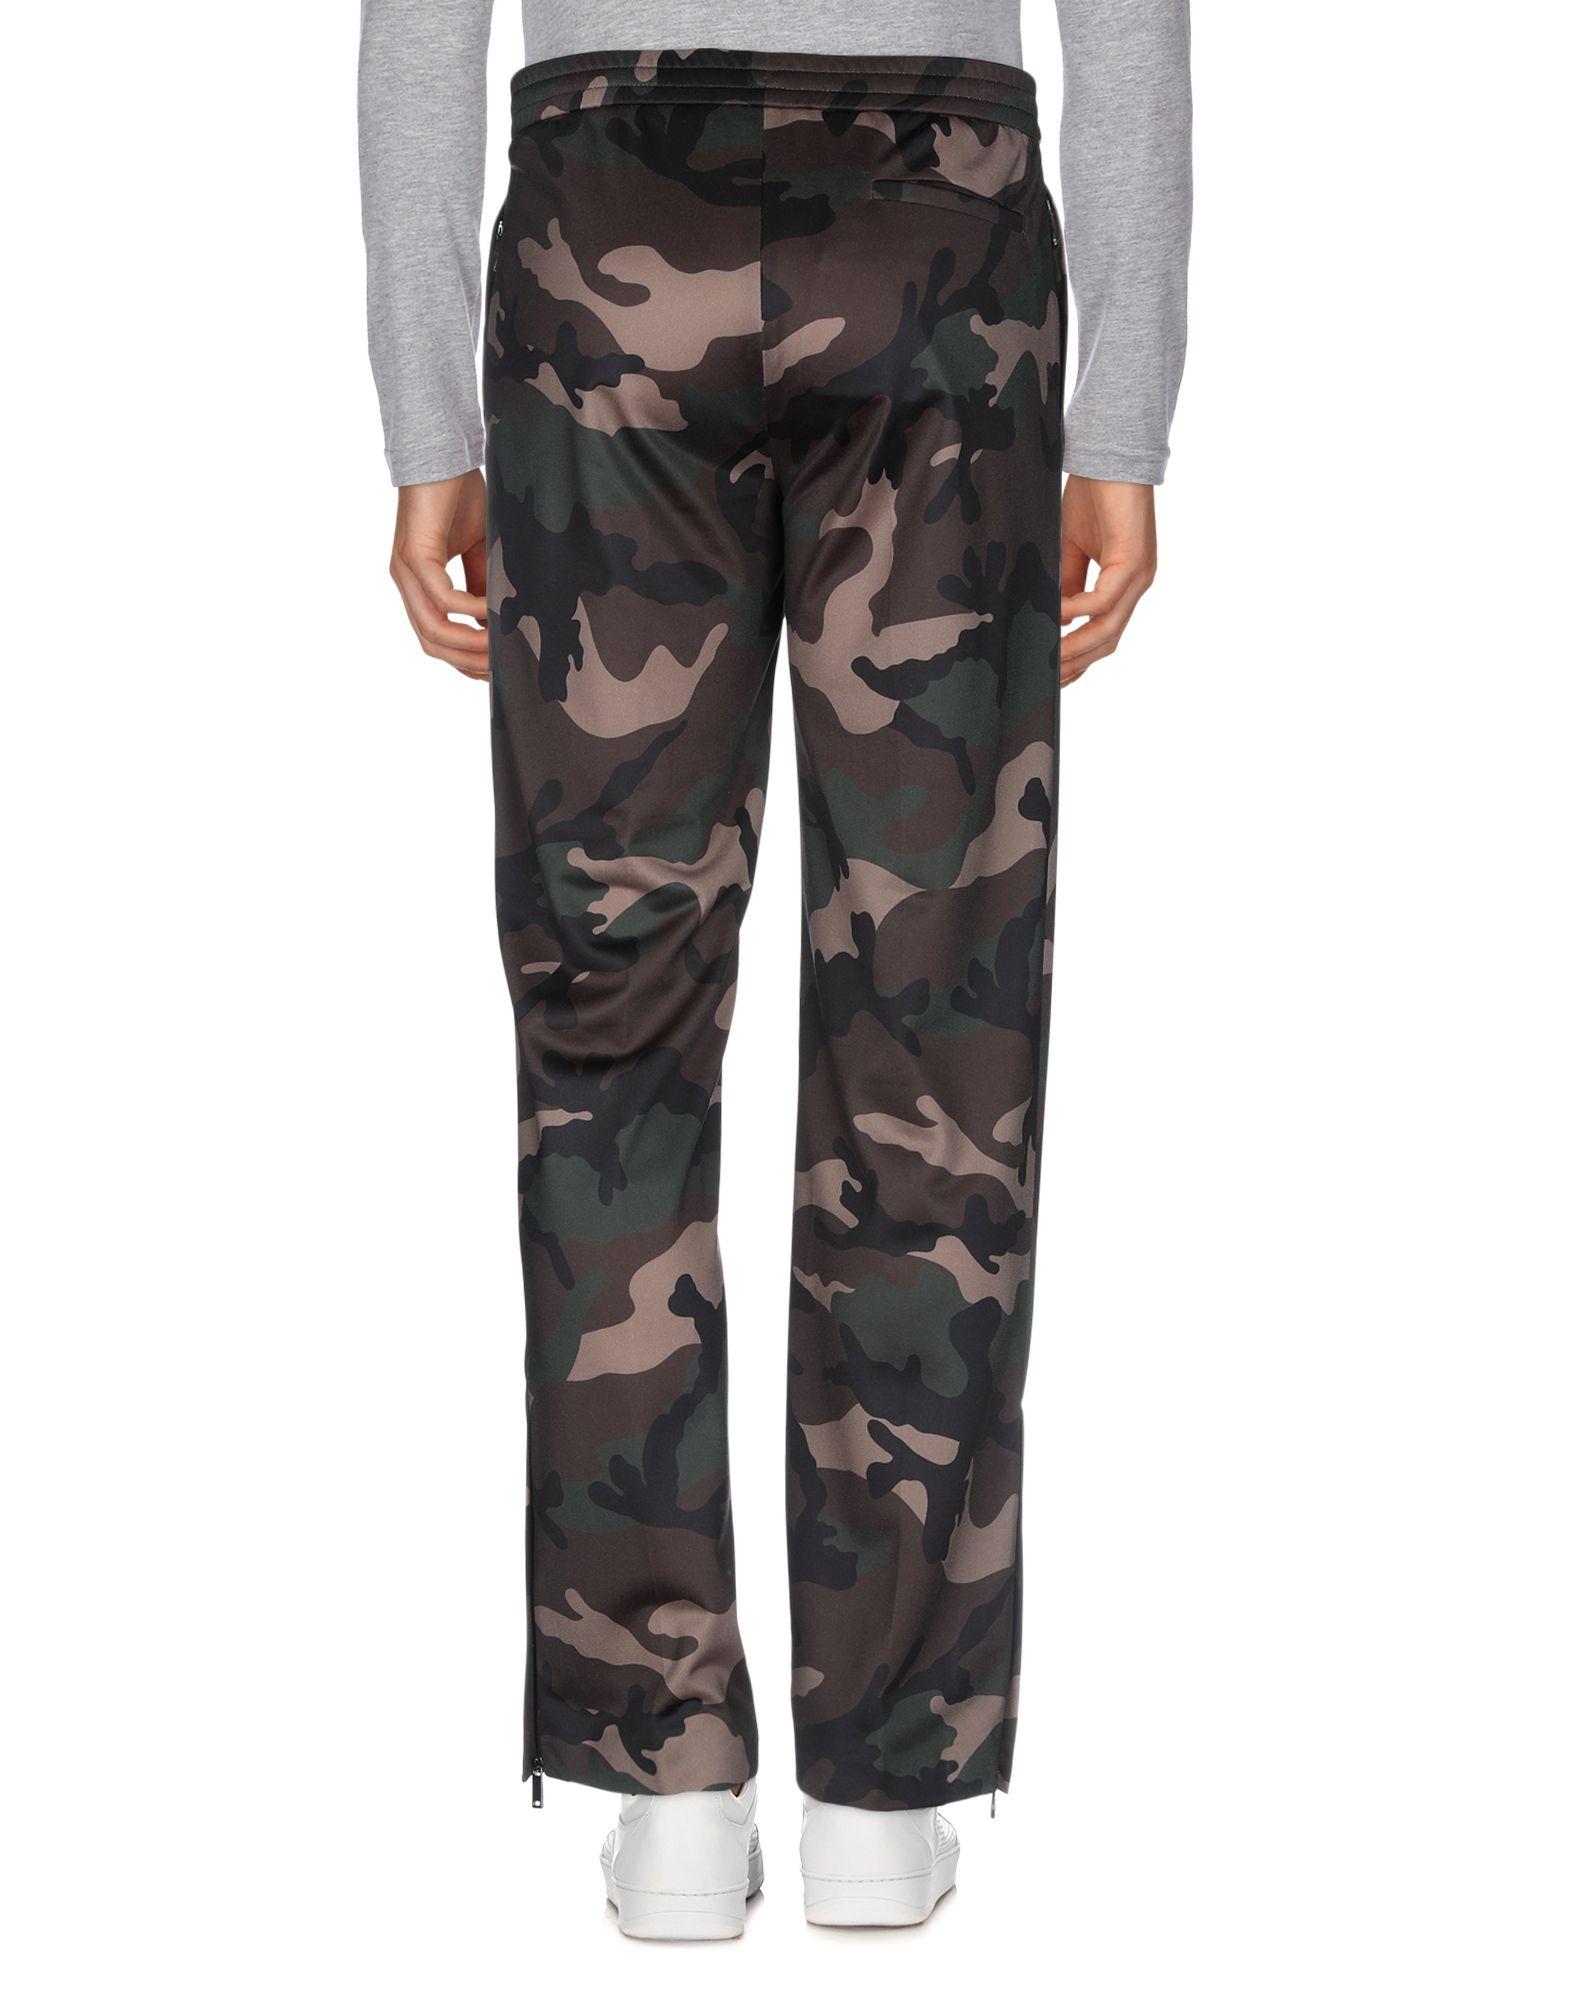 Valentino Synthetic Casual Pants in Dark Green (Green) for Men - Lyst